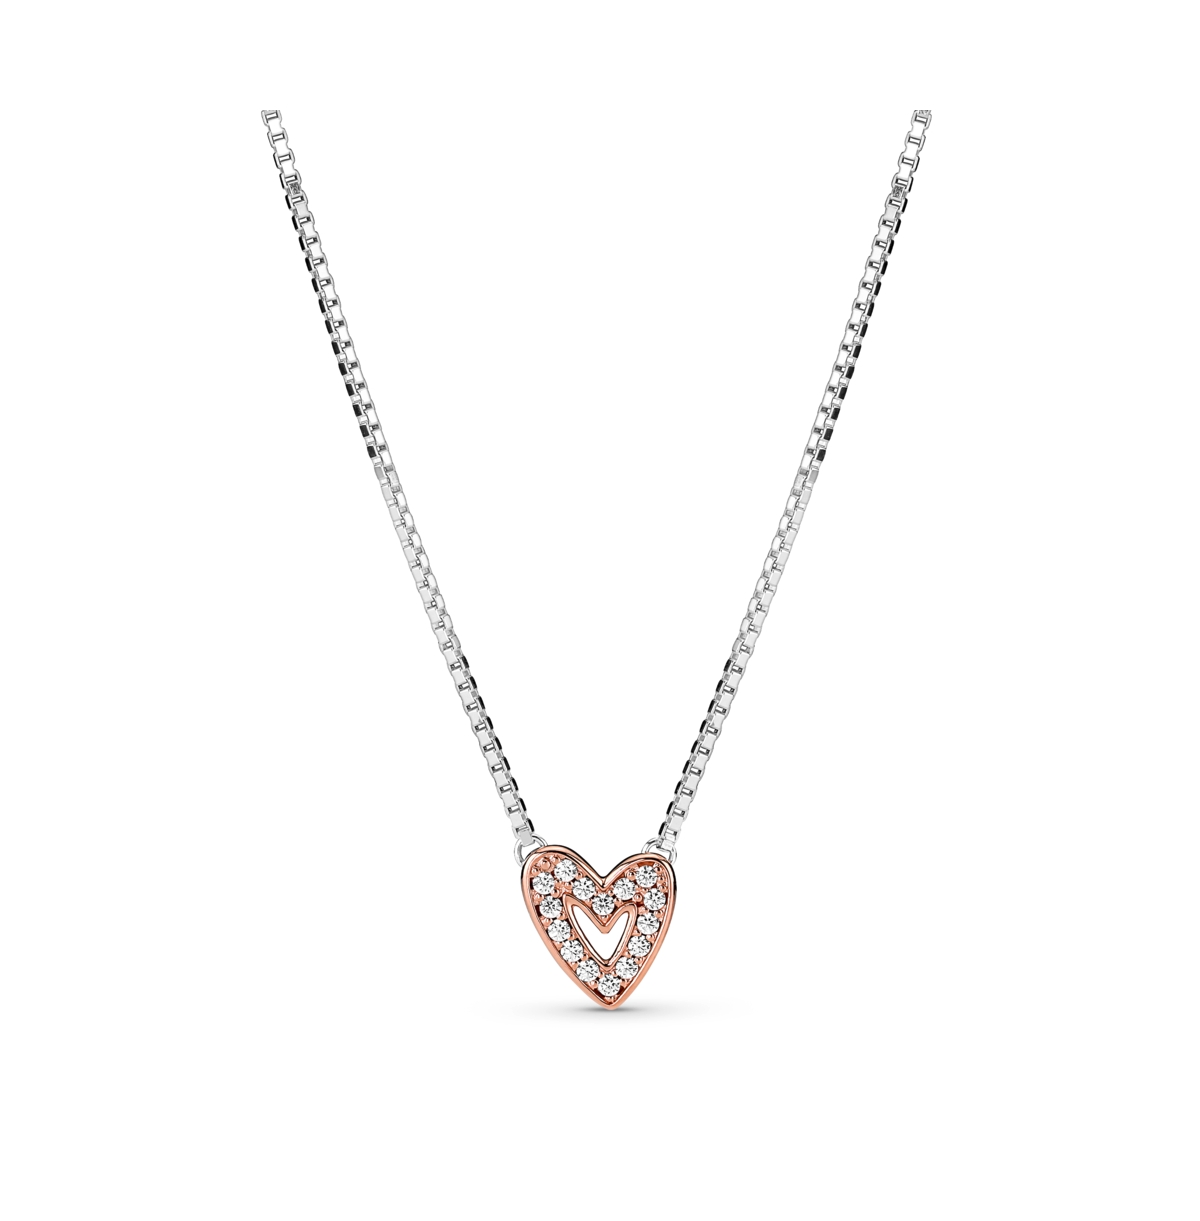 Moments 14K Rose Gold-Plated Sparkling Cubic Zirconia Freehand Heart Necklace - Rose Gold